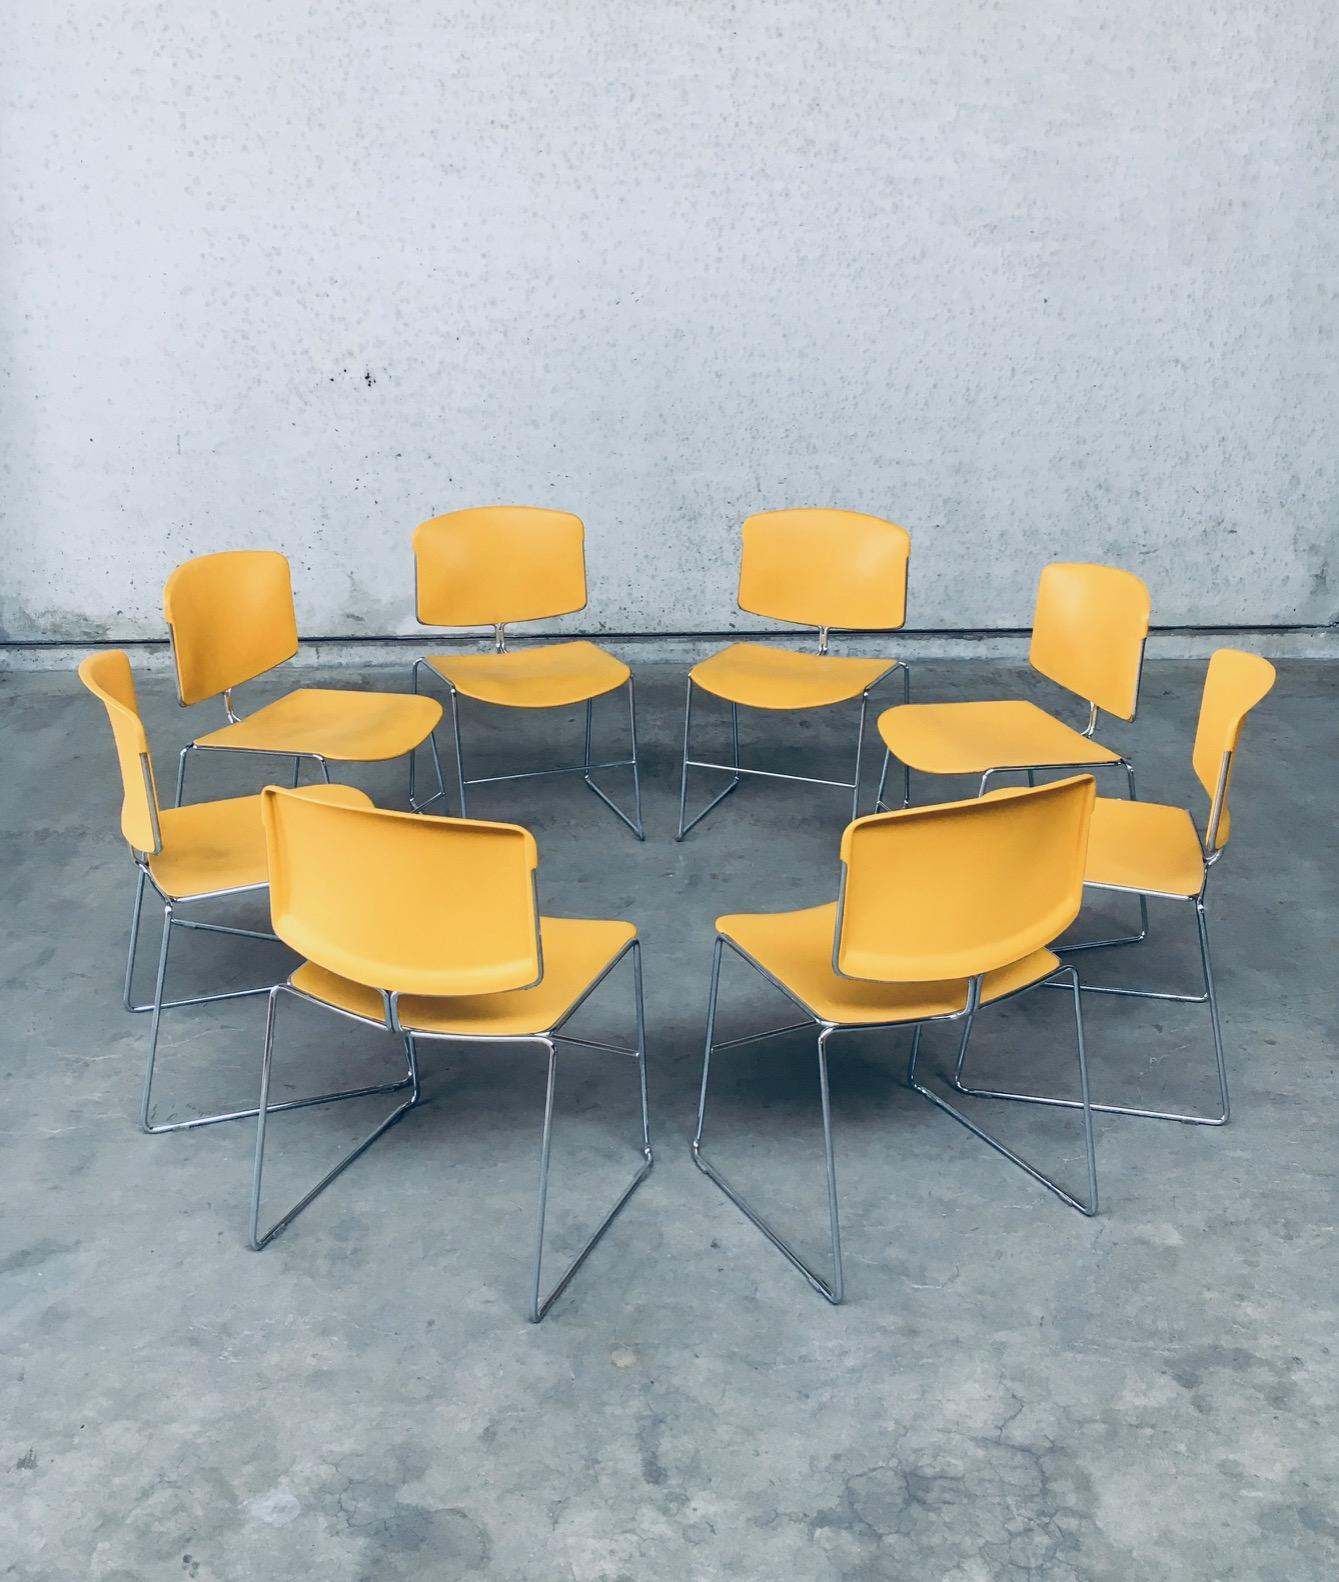 American Set of 8 Max Stacker Conference / Office Chairs by Steelcase Strafor, Usa 1980's For Sale